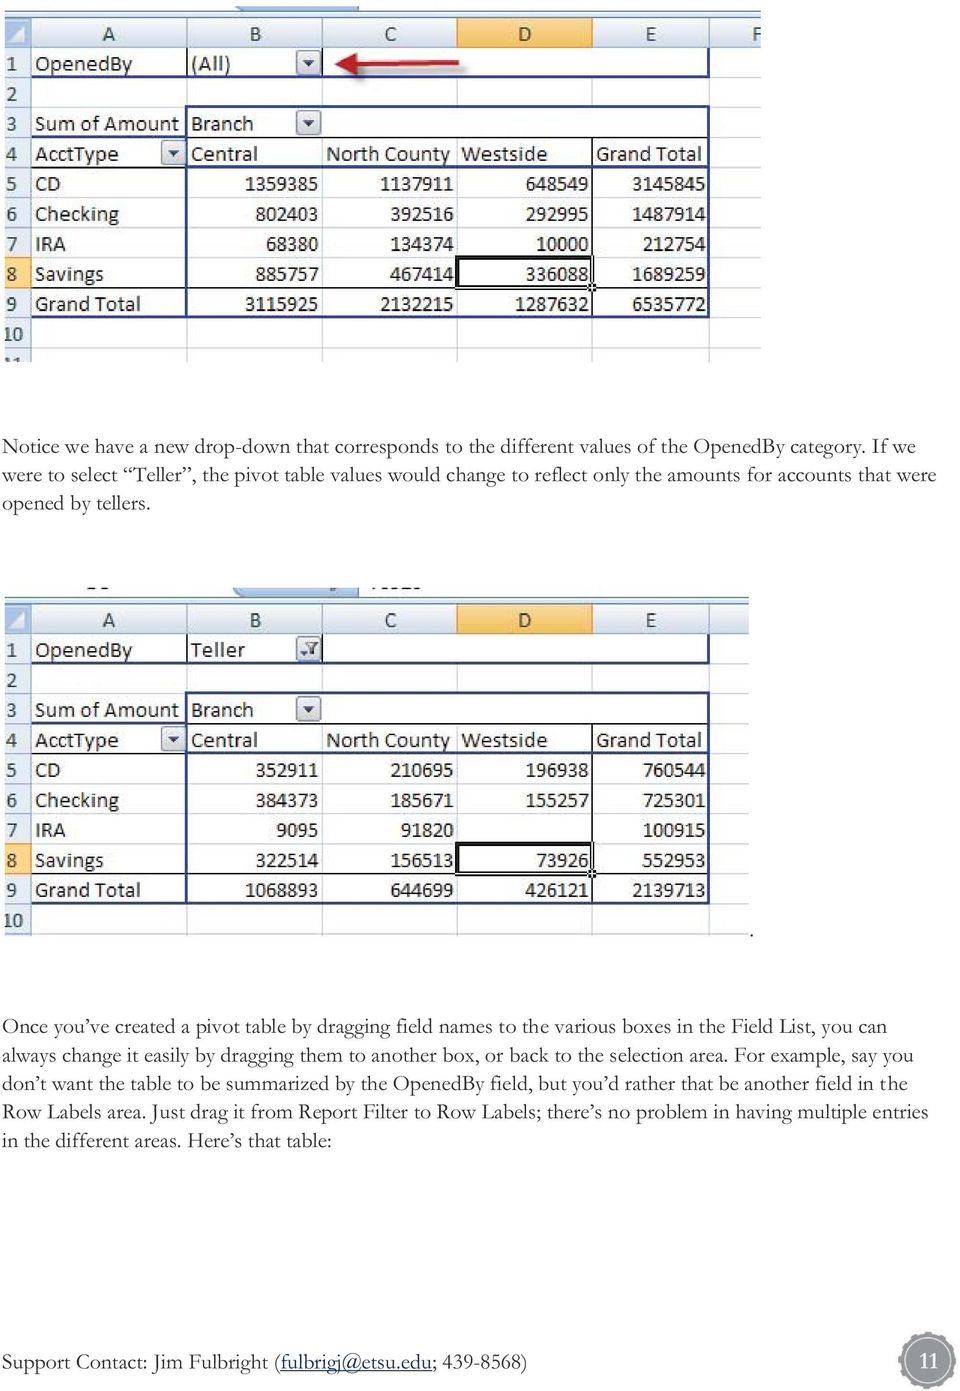 . Once you ve created a pivot table by dragging field names to the various boxes in the Field List, you can always change it easily by dragging them to another box, or back to the selection